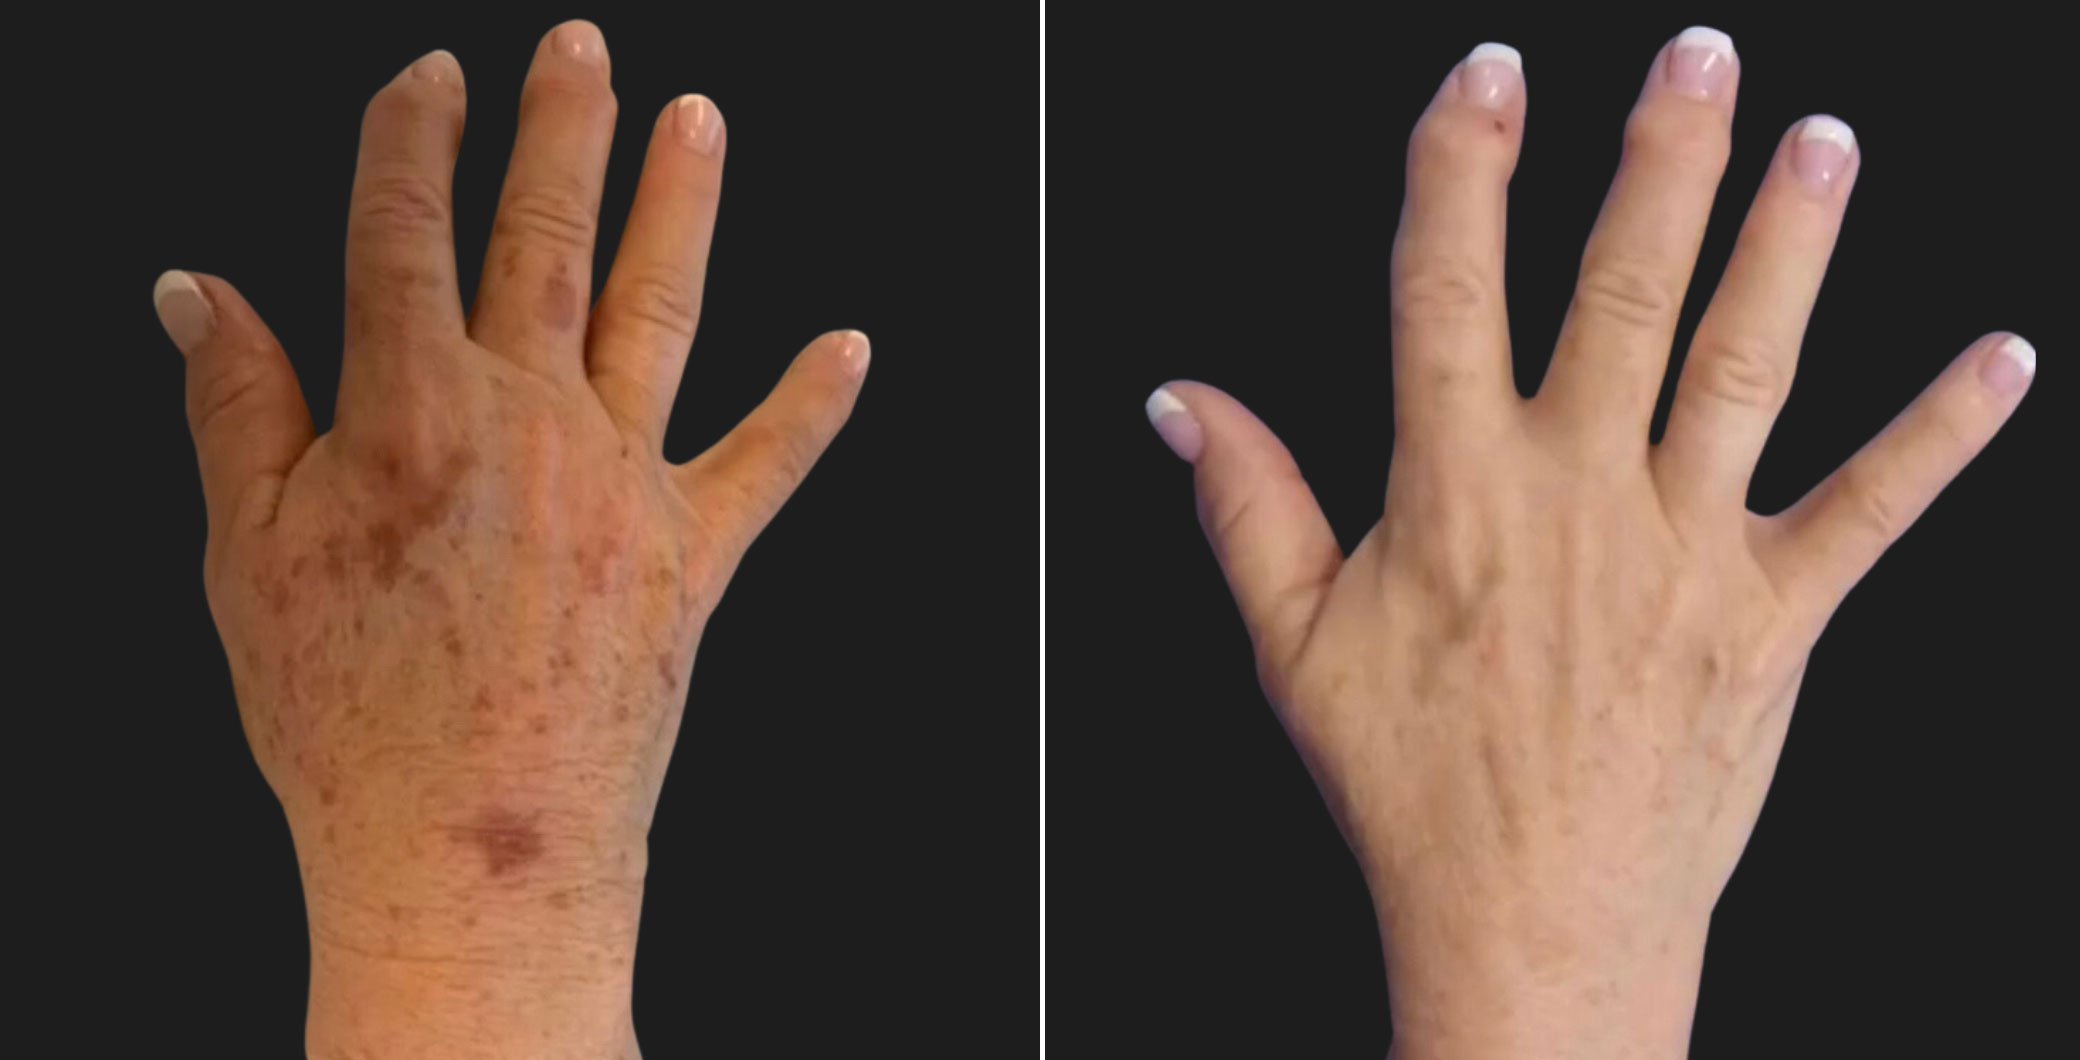 Before and After 3 Sessions of Pico Glow Laser on the Hands